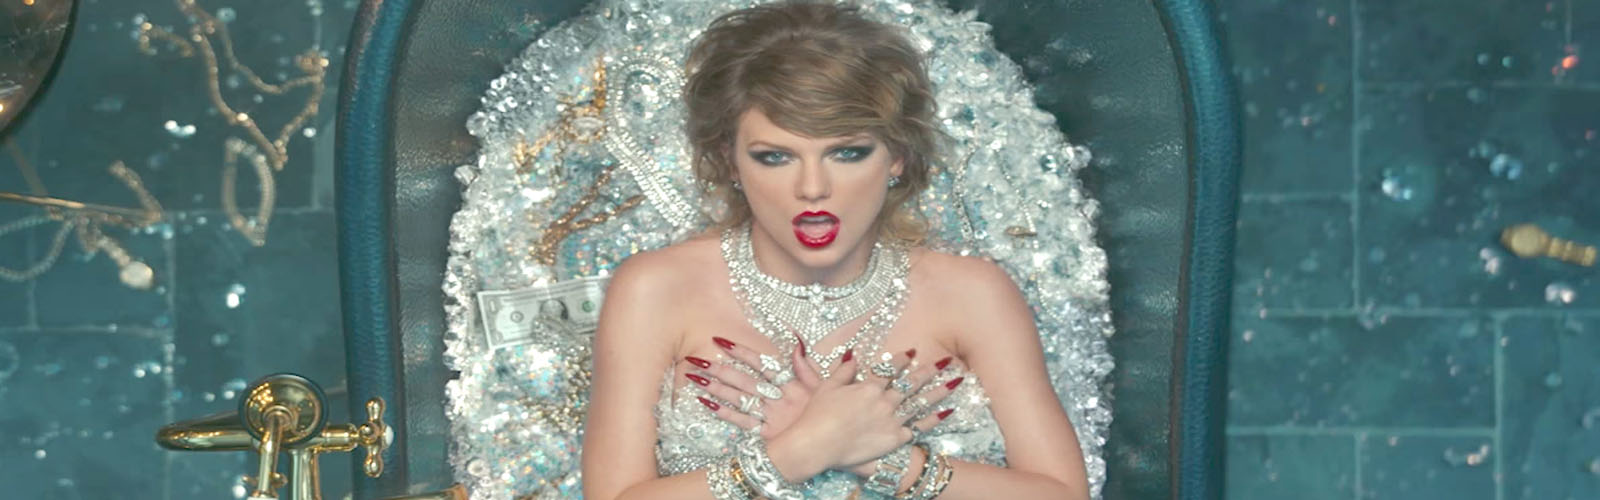 Taylor Swift's new music video makes biggest YouTube debut ever